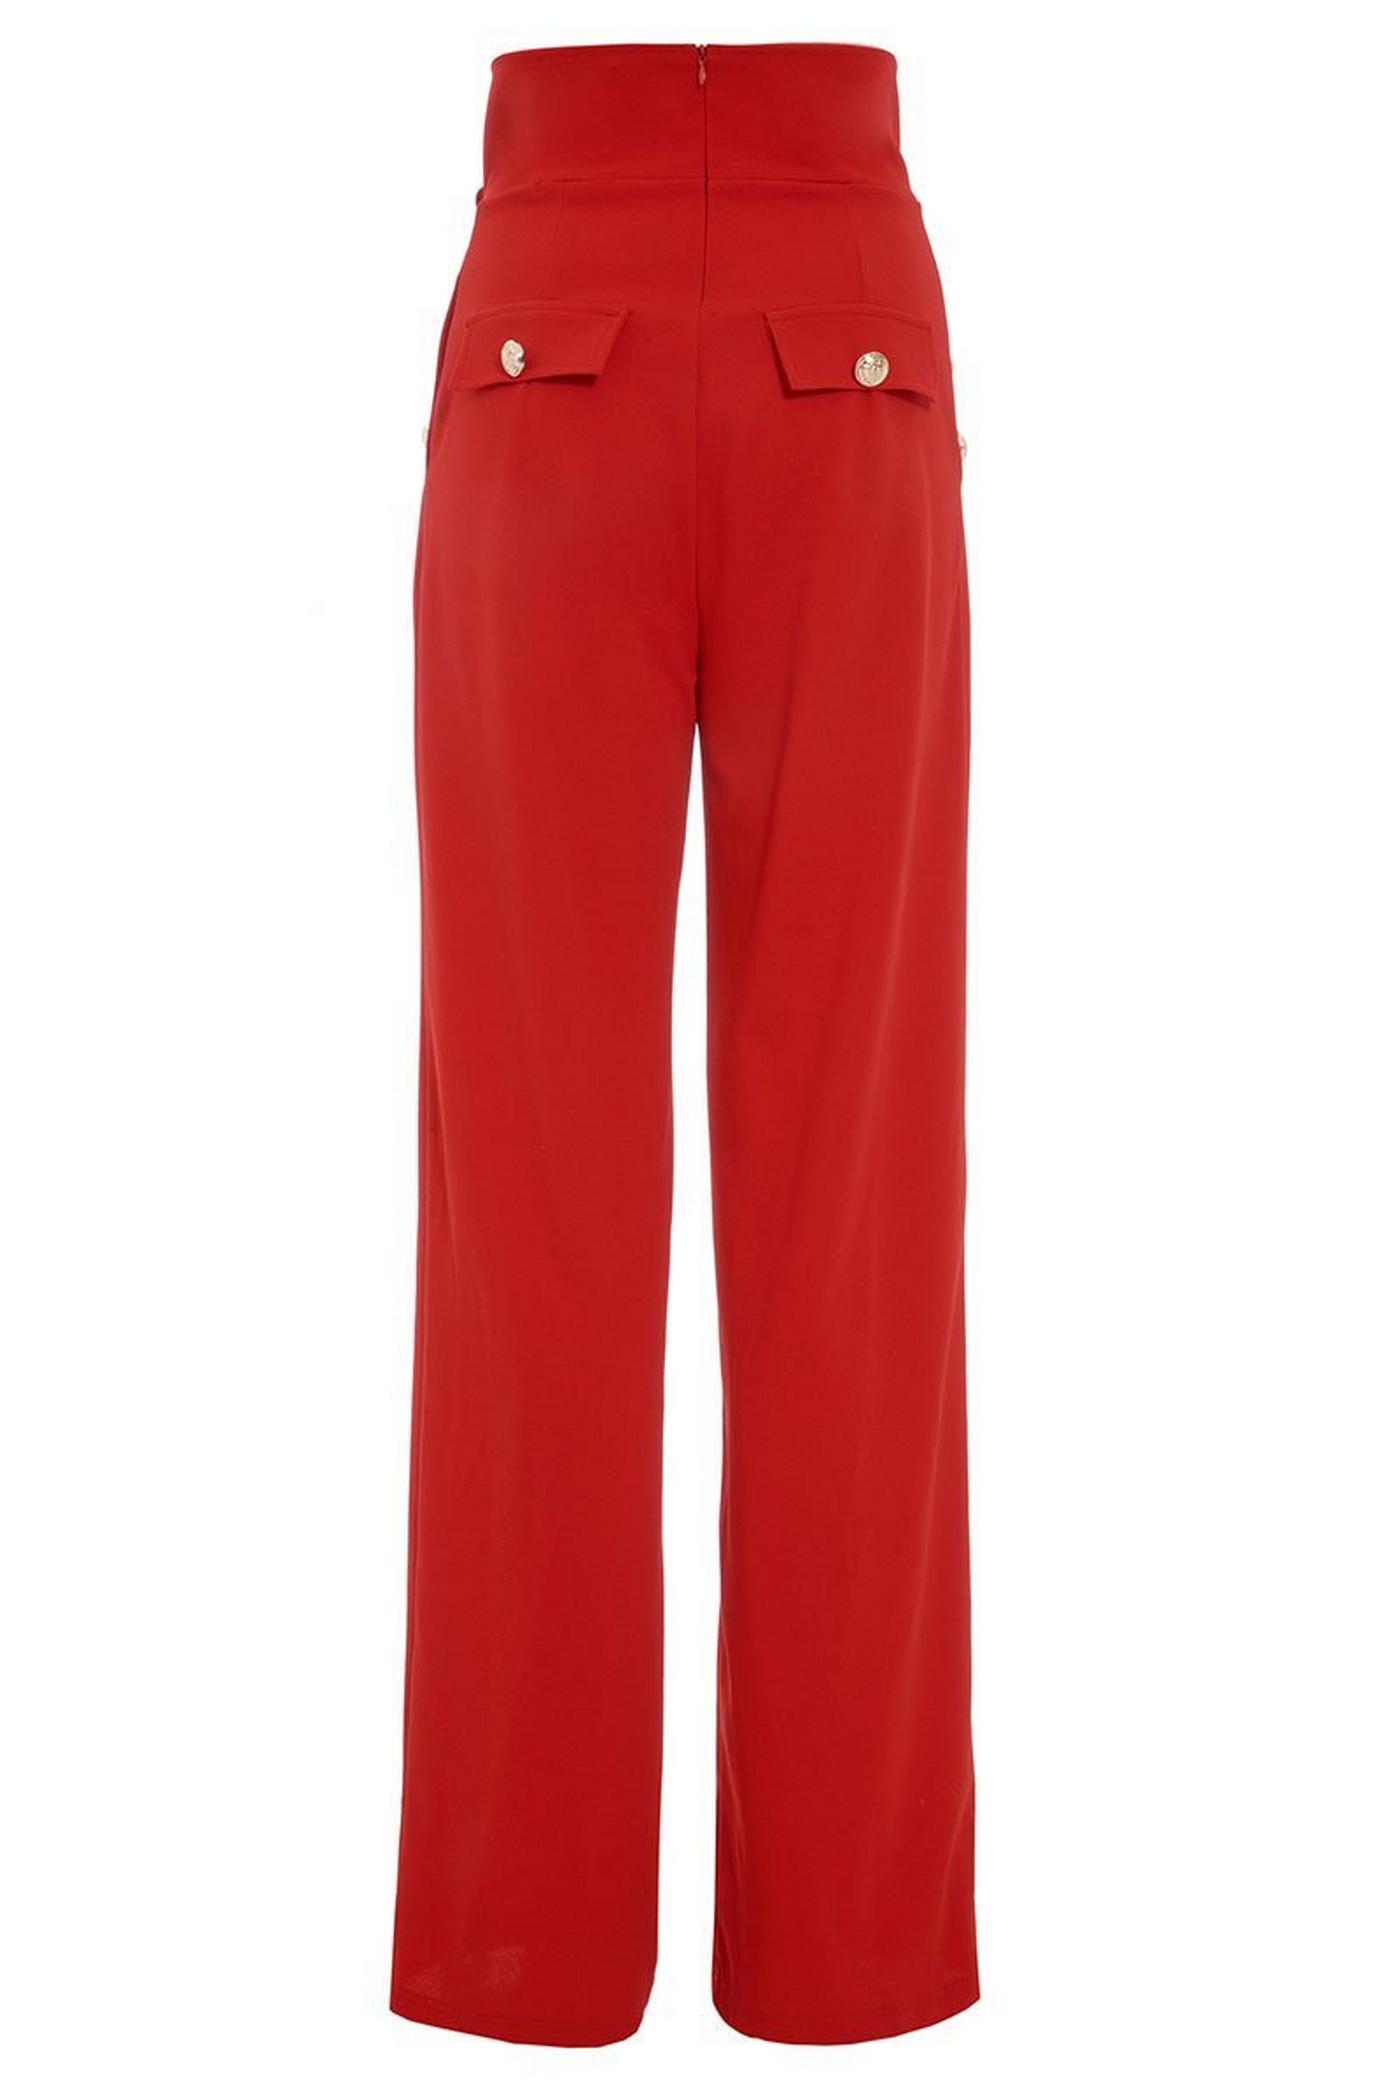 Red Crepe High Waist Palazzo Trousers